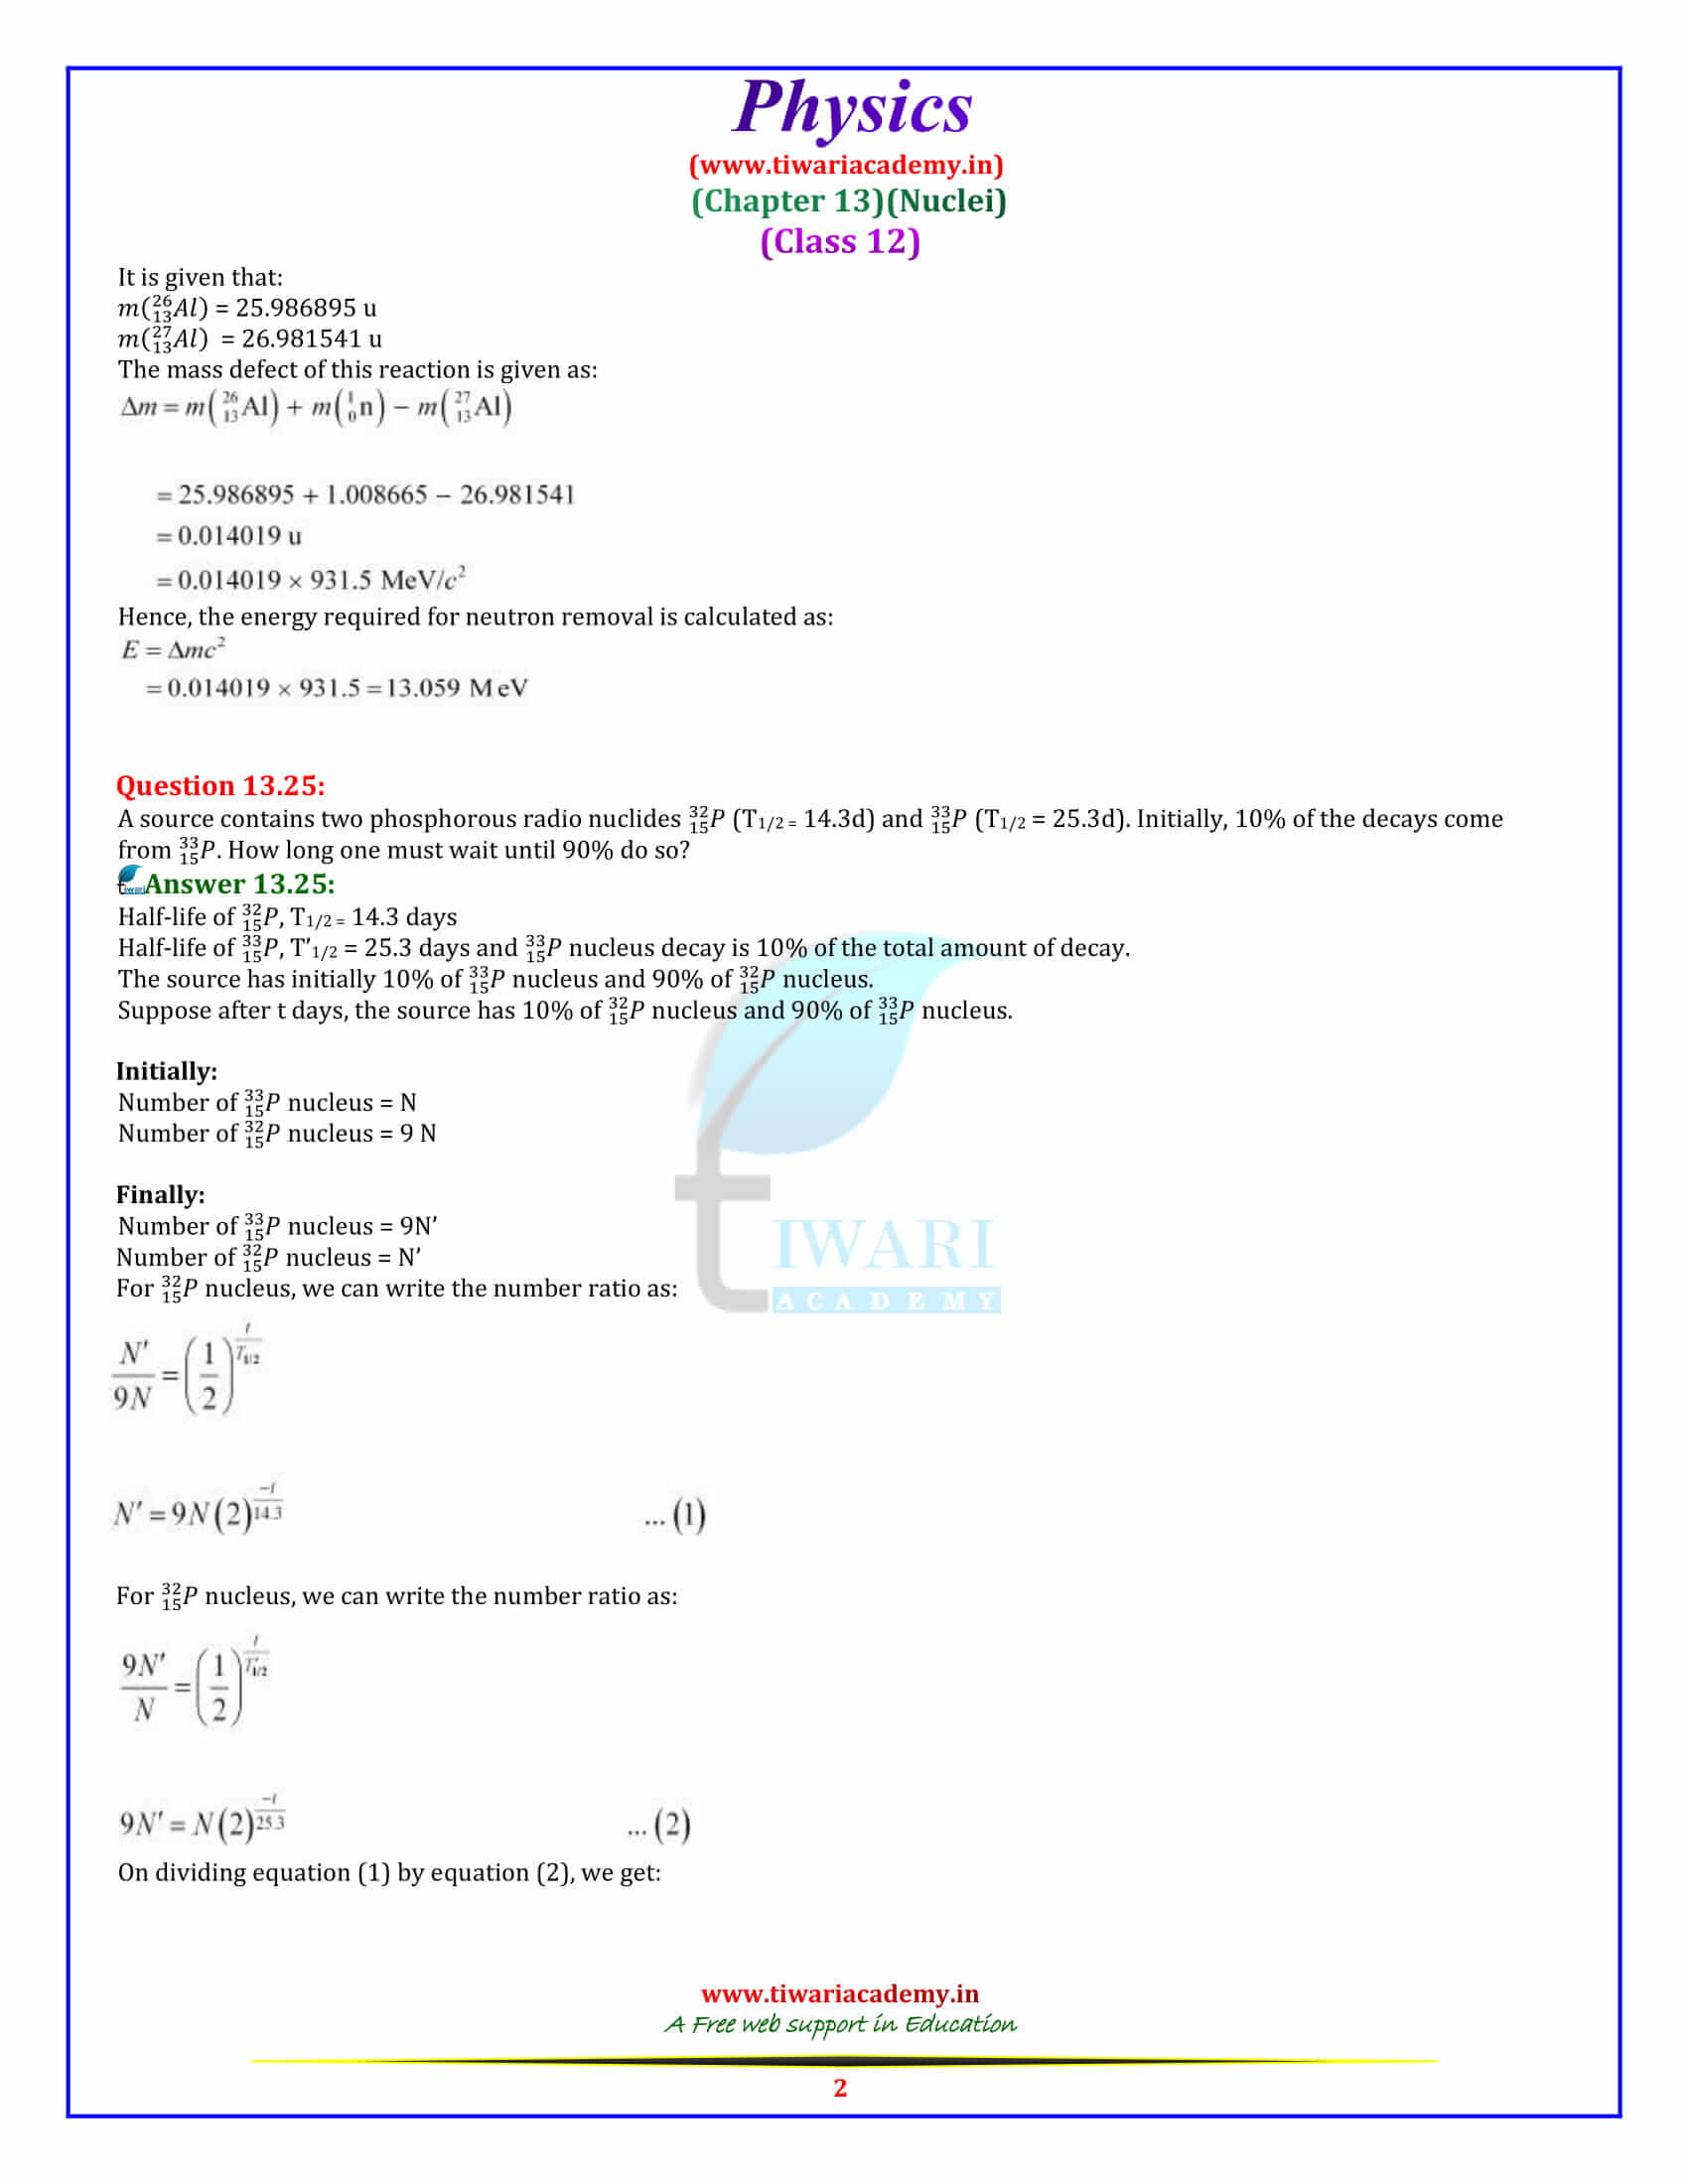 12 Physics Chapter 13 Nuclei additional exercises answers in pdf form